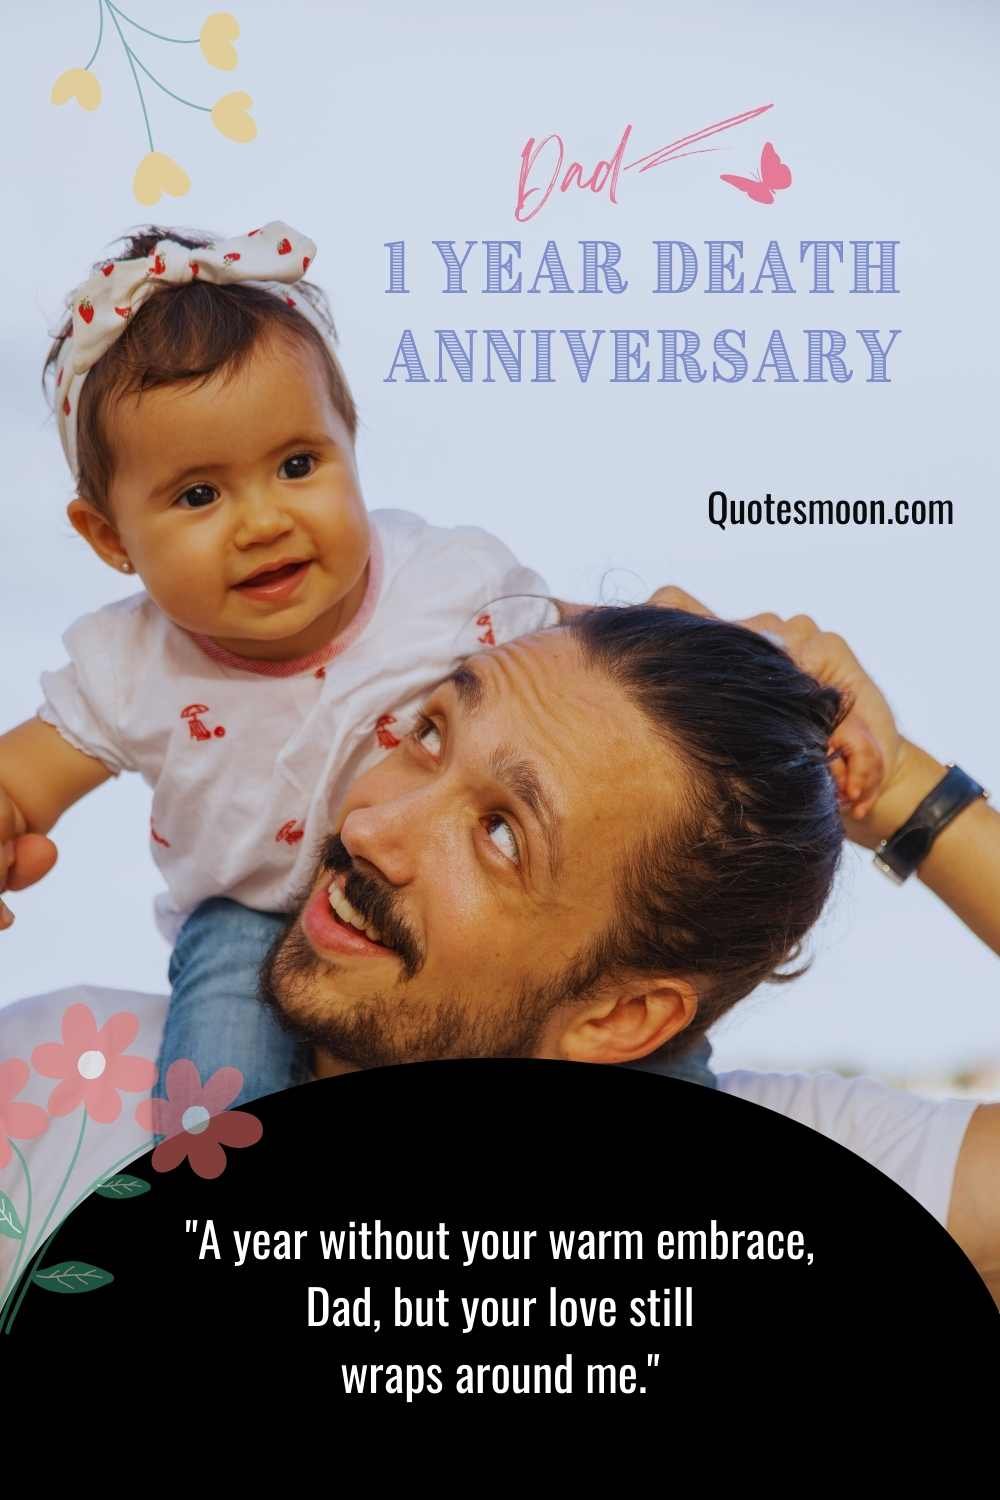 Father 1 Year Death Anniversary Quotes From Daughter with images HD